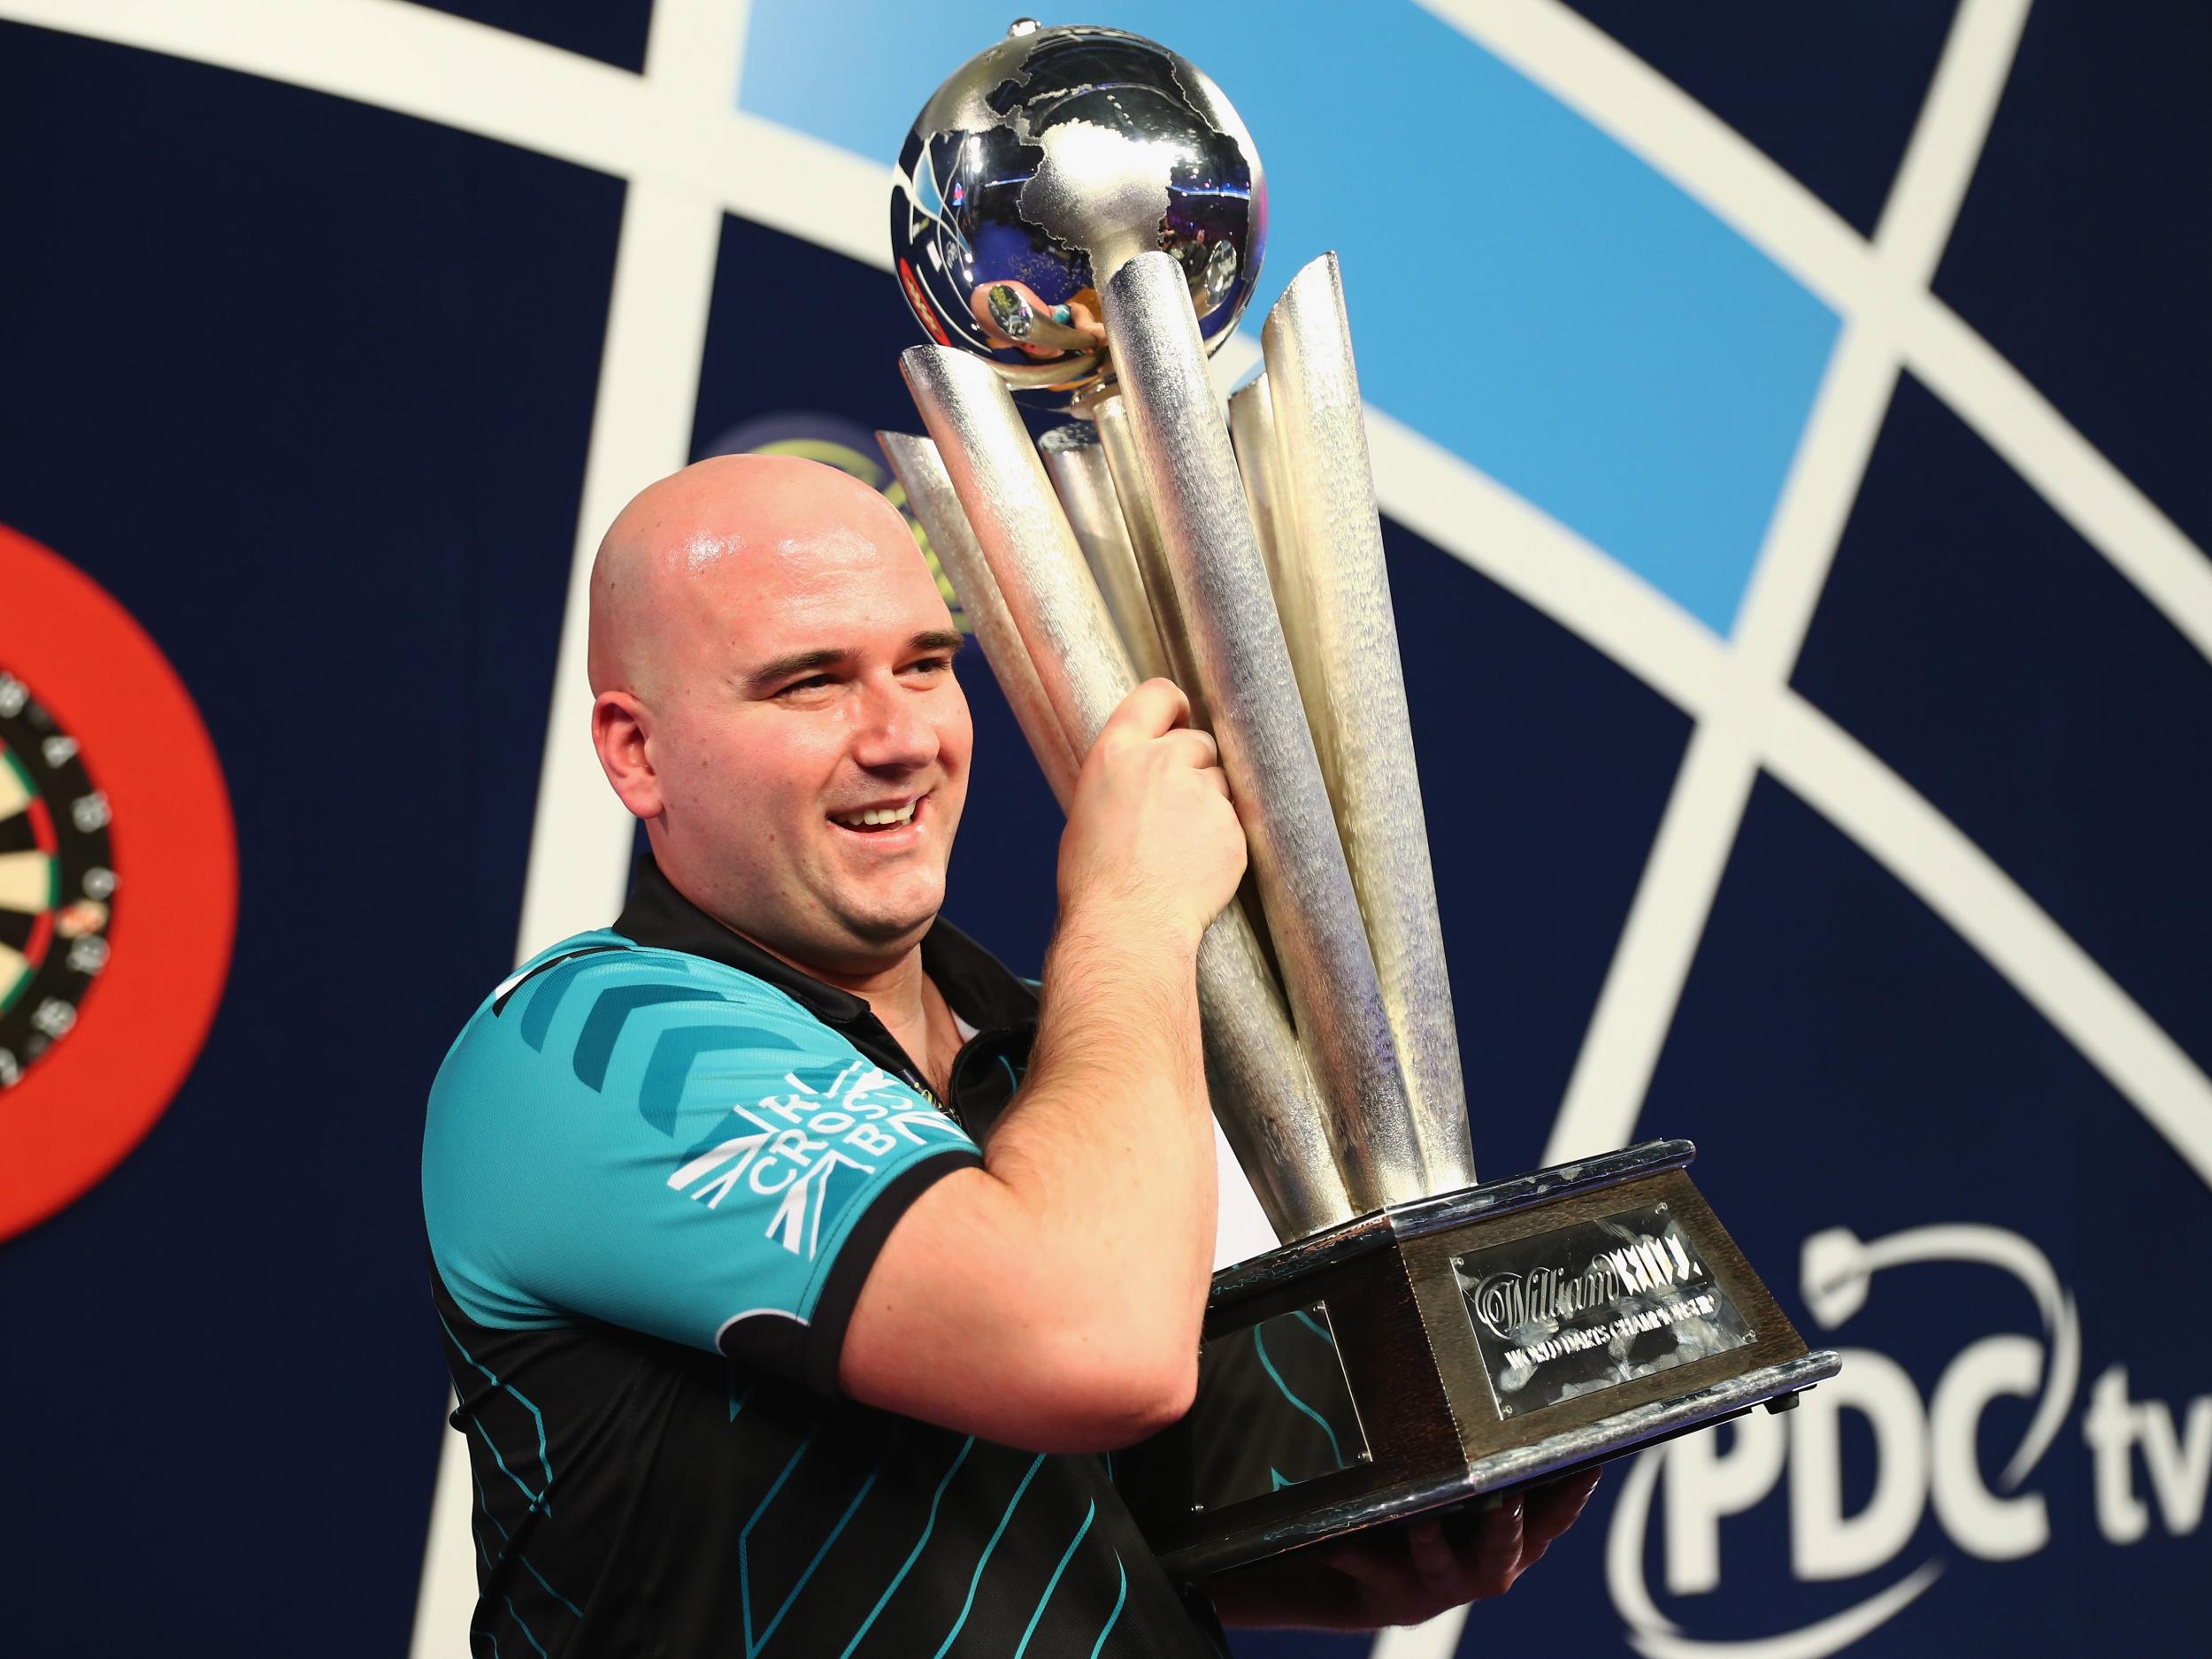 World Darts Championship: When does it channel, schedule, order of play, odds tickets | The Independent | The Independent